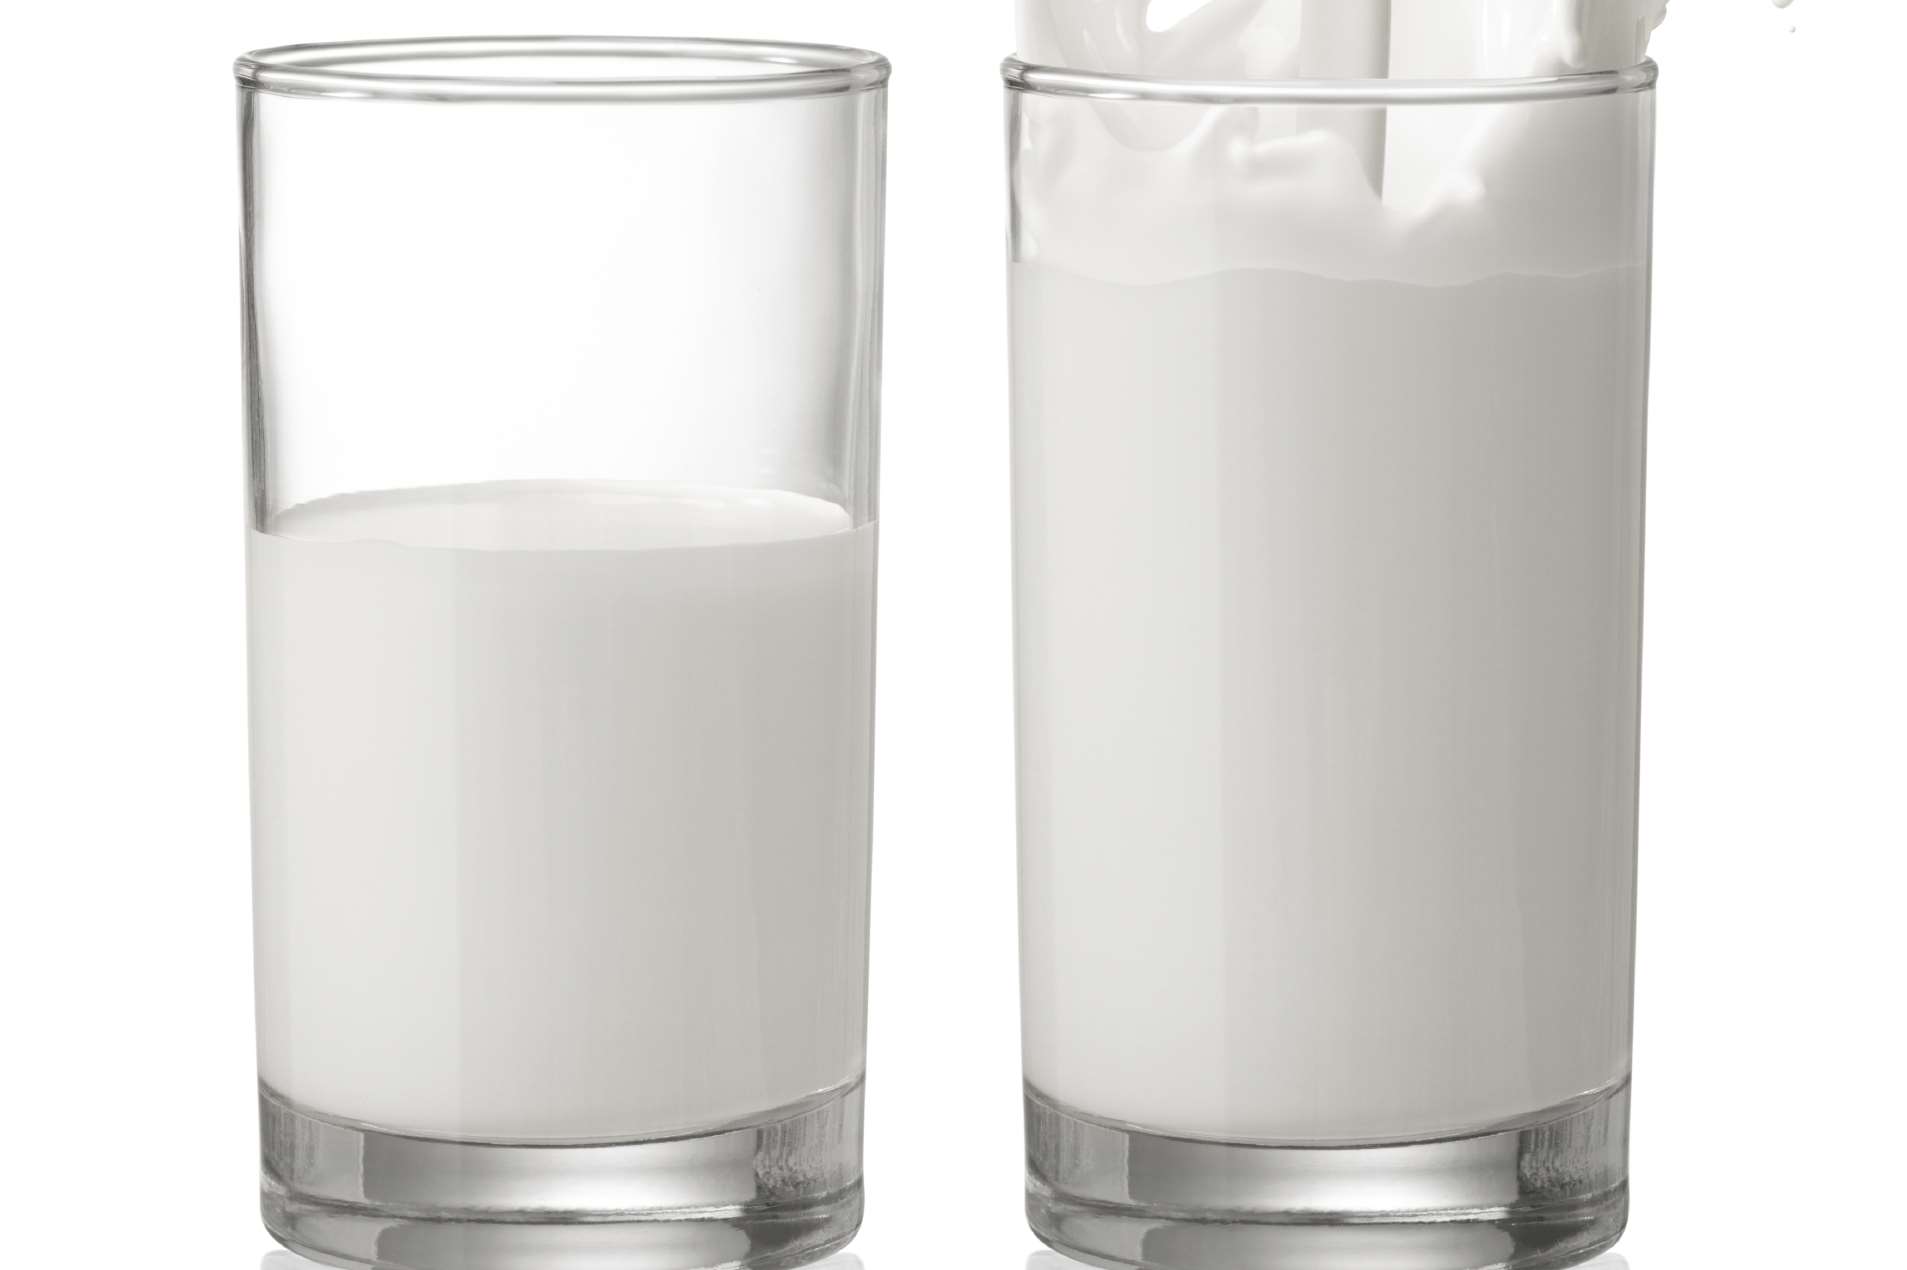 Many people believe cows' milk is to blame for their stomach issues